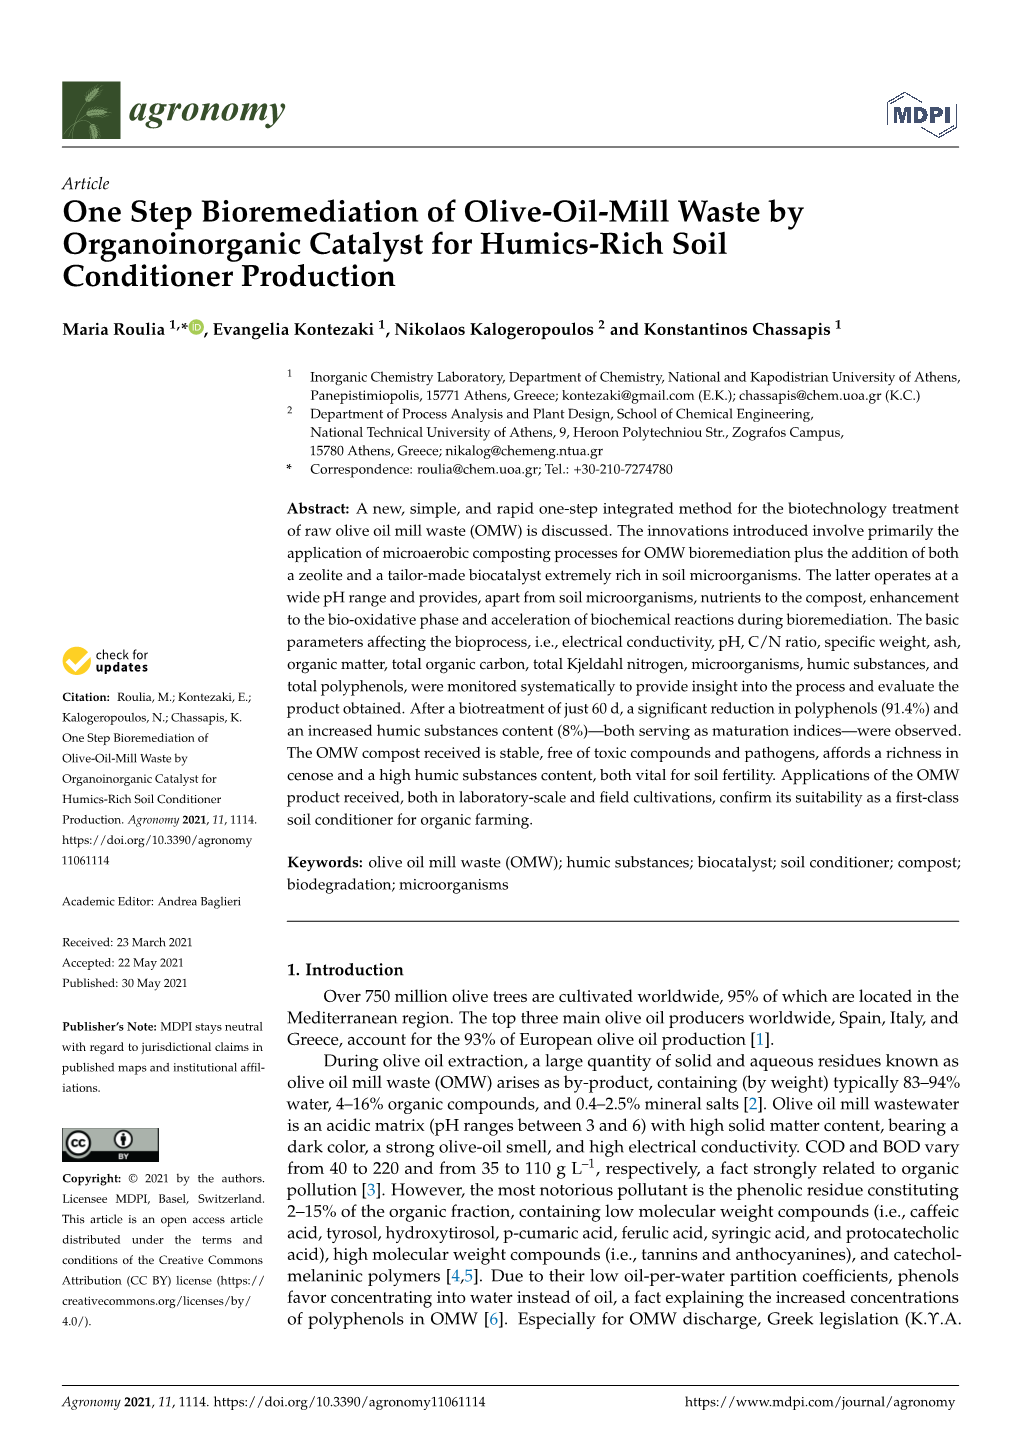 One Step Bioremediation of Olive-Oil-Mill Waste by Organoinorganic Catalyst for Humics-Rich Soil Conditioner Production